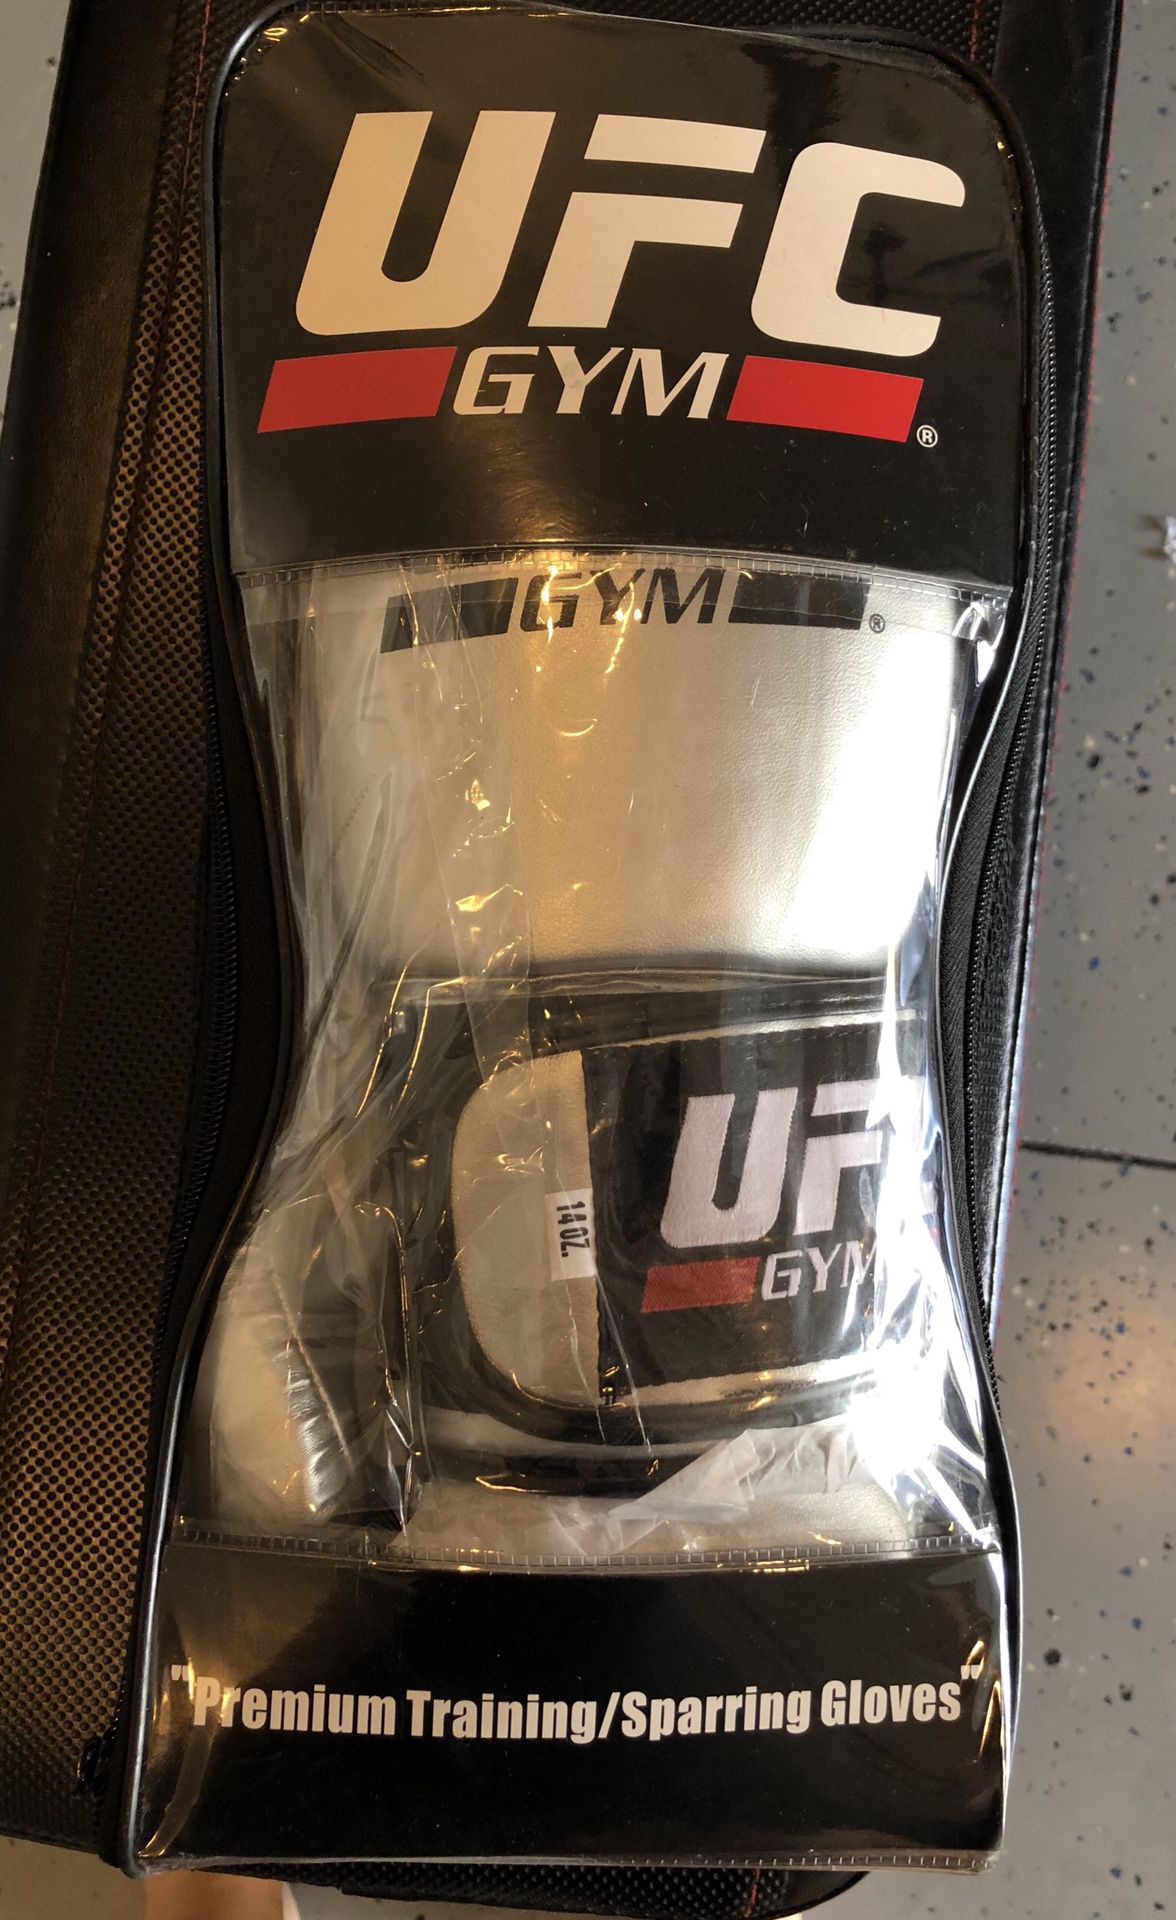 Fighting Gloves - UFC. Never been opened